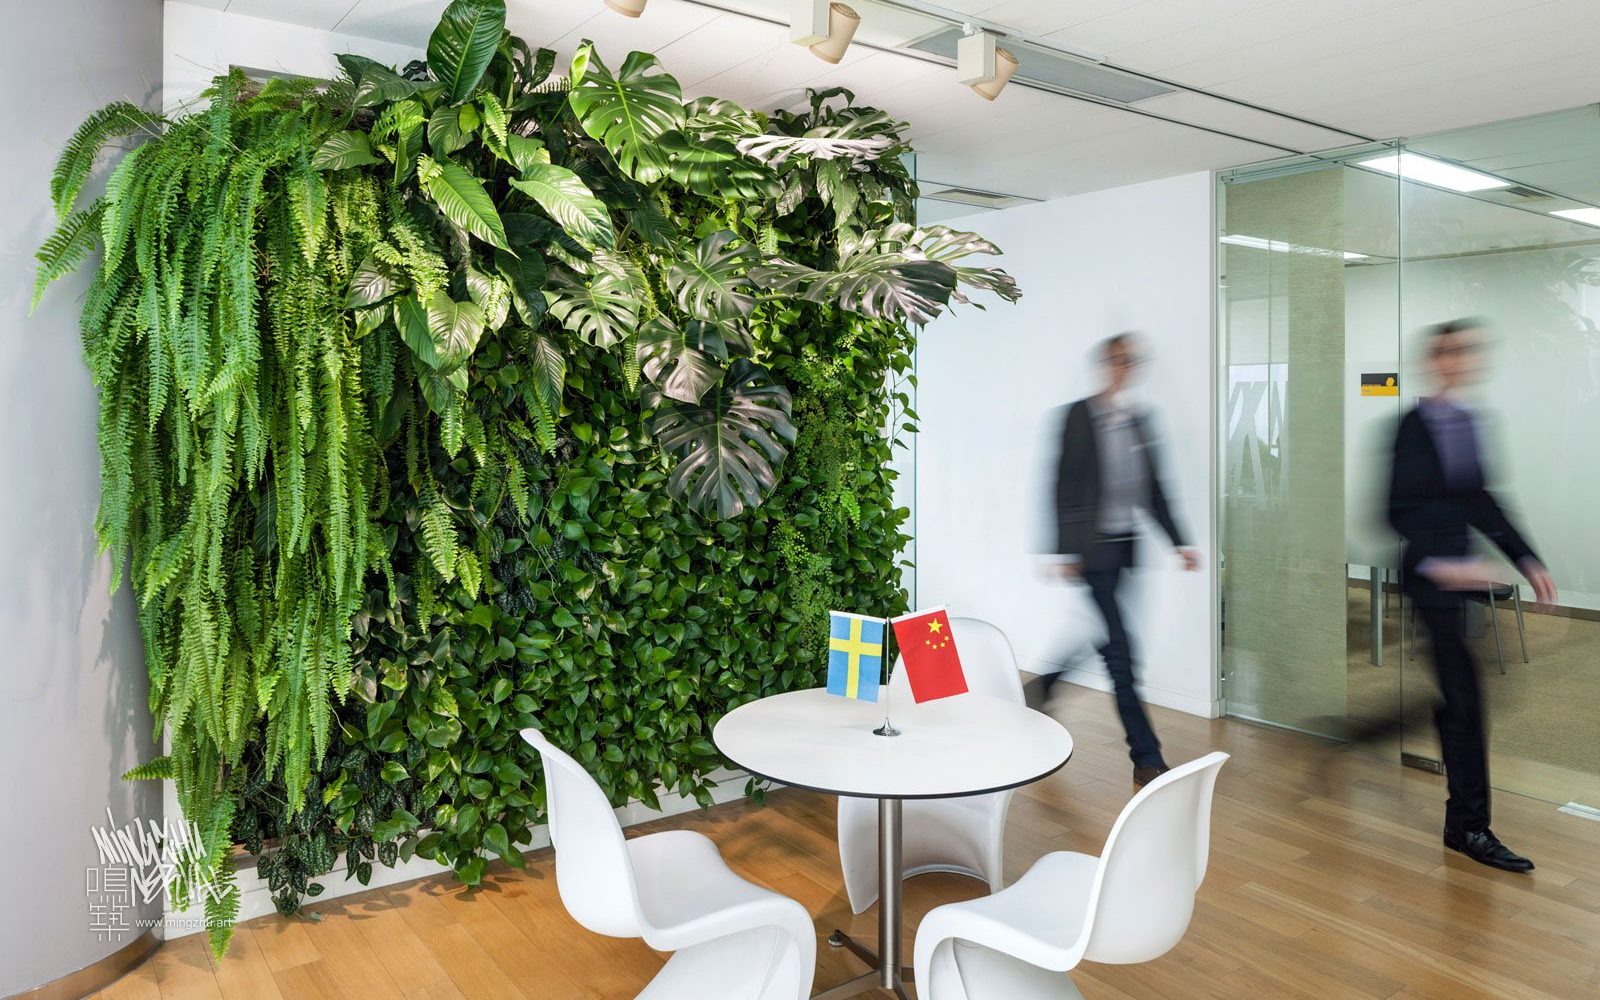 At Mingzhu Nerval, we thrive at creating the most beautiful vertical gardens in the world. For the Swedish Consulate, we created a healthy nature workspace - Shanghai, 2012.